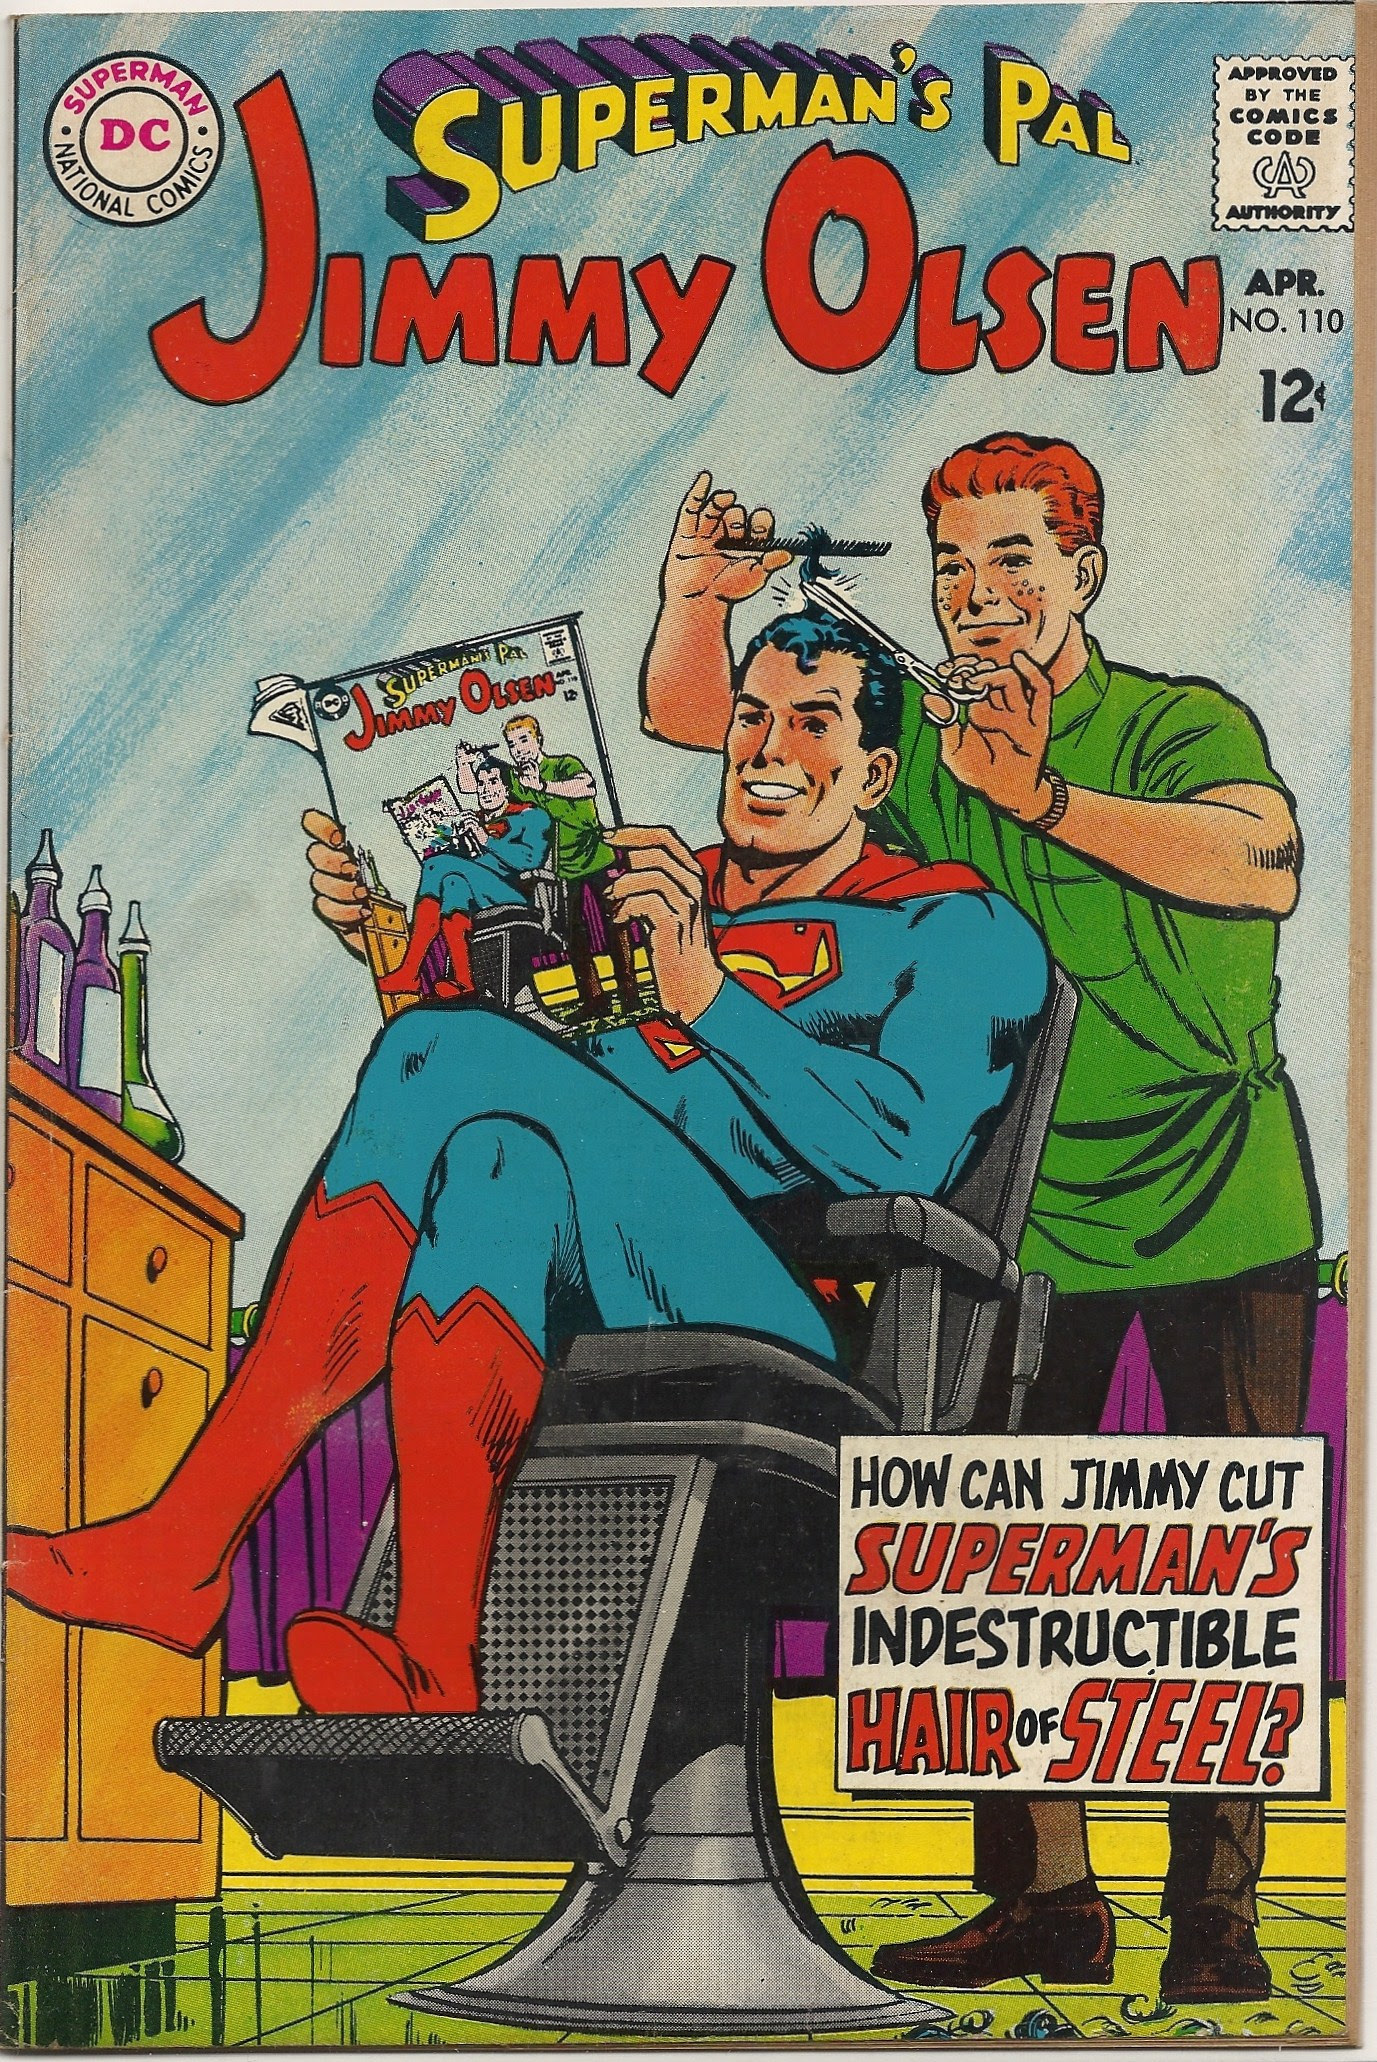 How can Jimmy cut Superman's indestructible hair of steel?